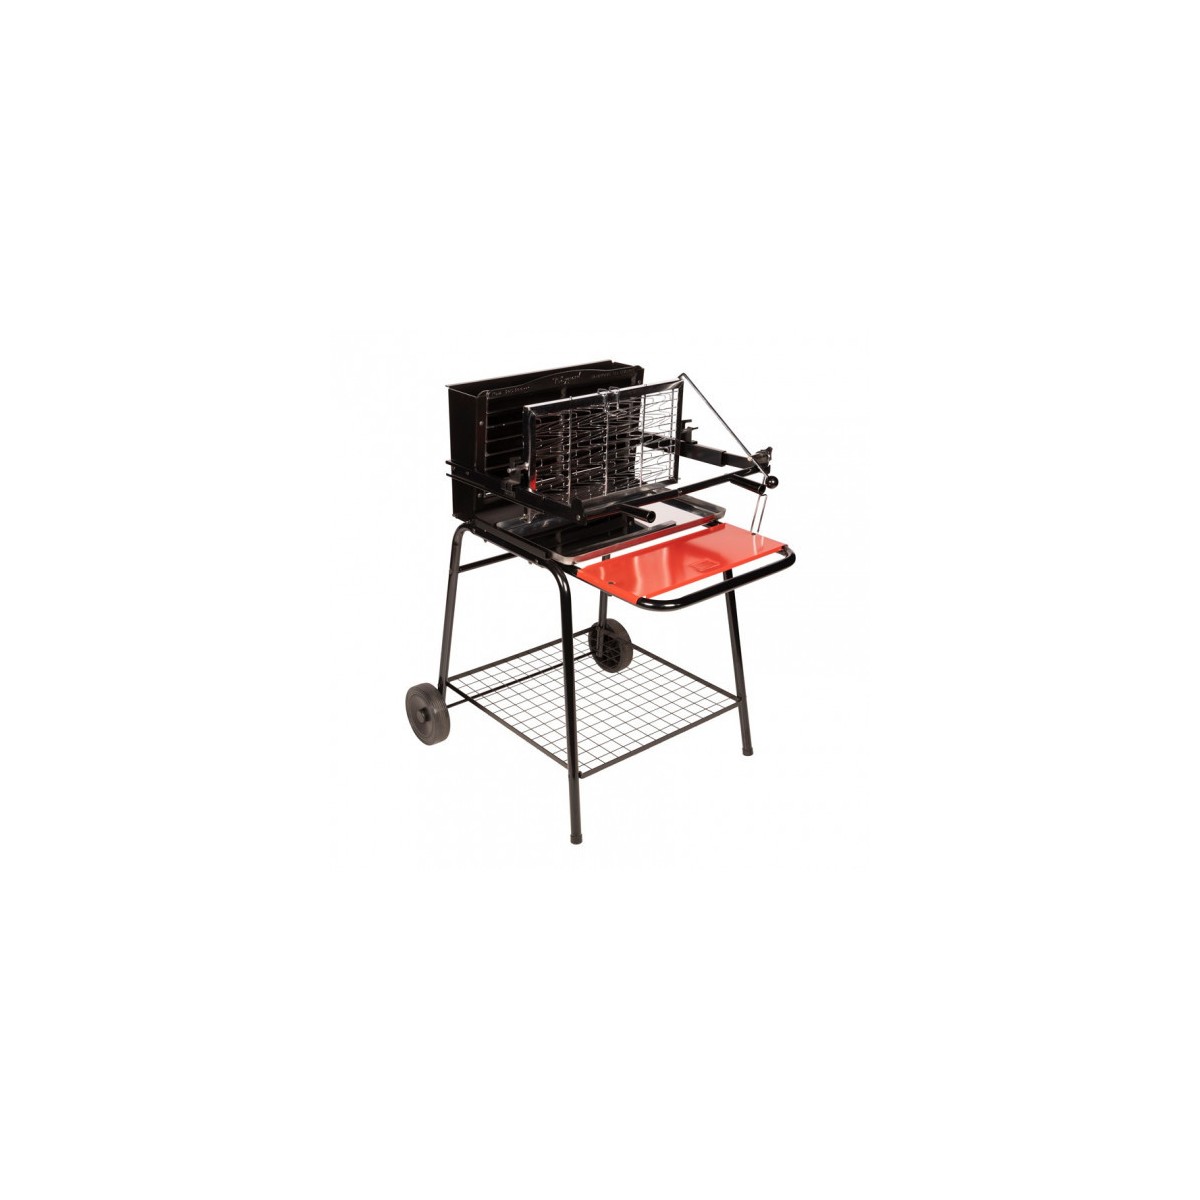 Raymond - Barbecue Charbon Fonte Vertical